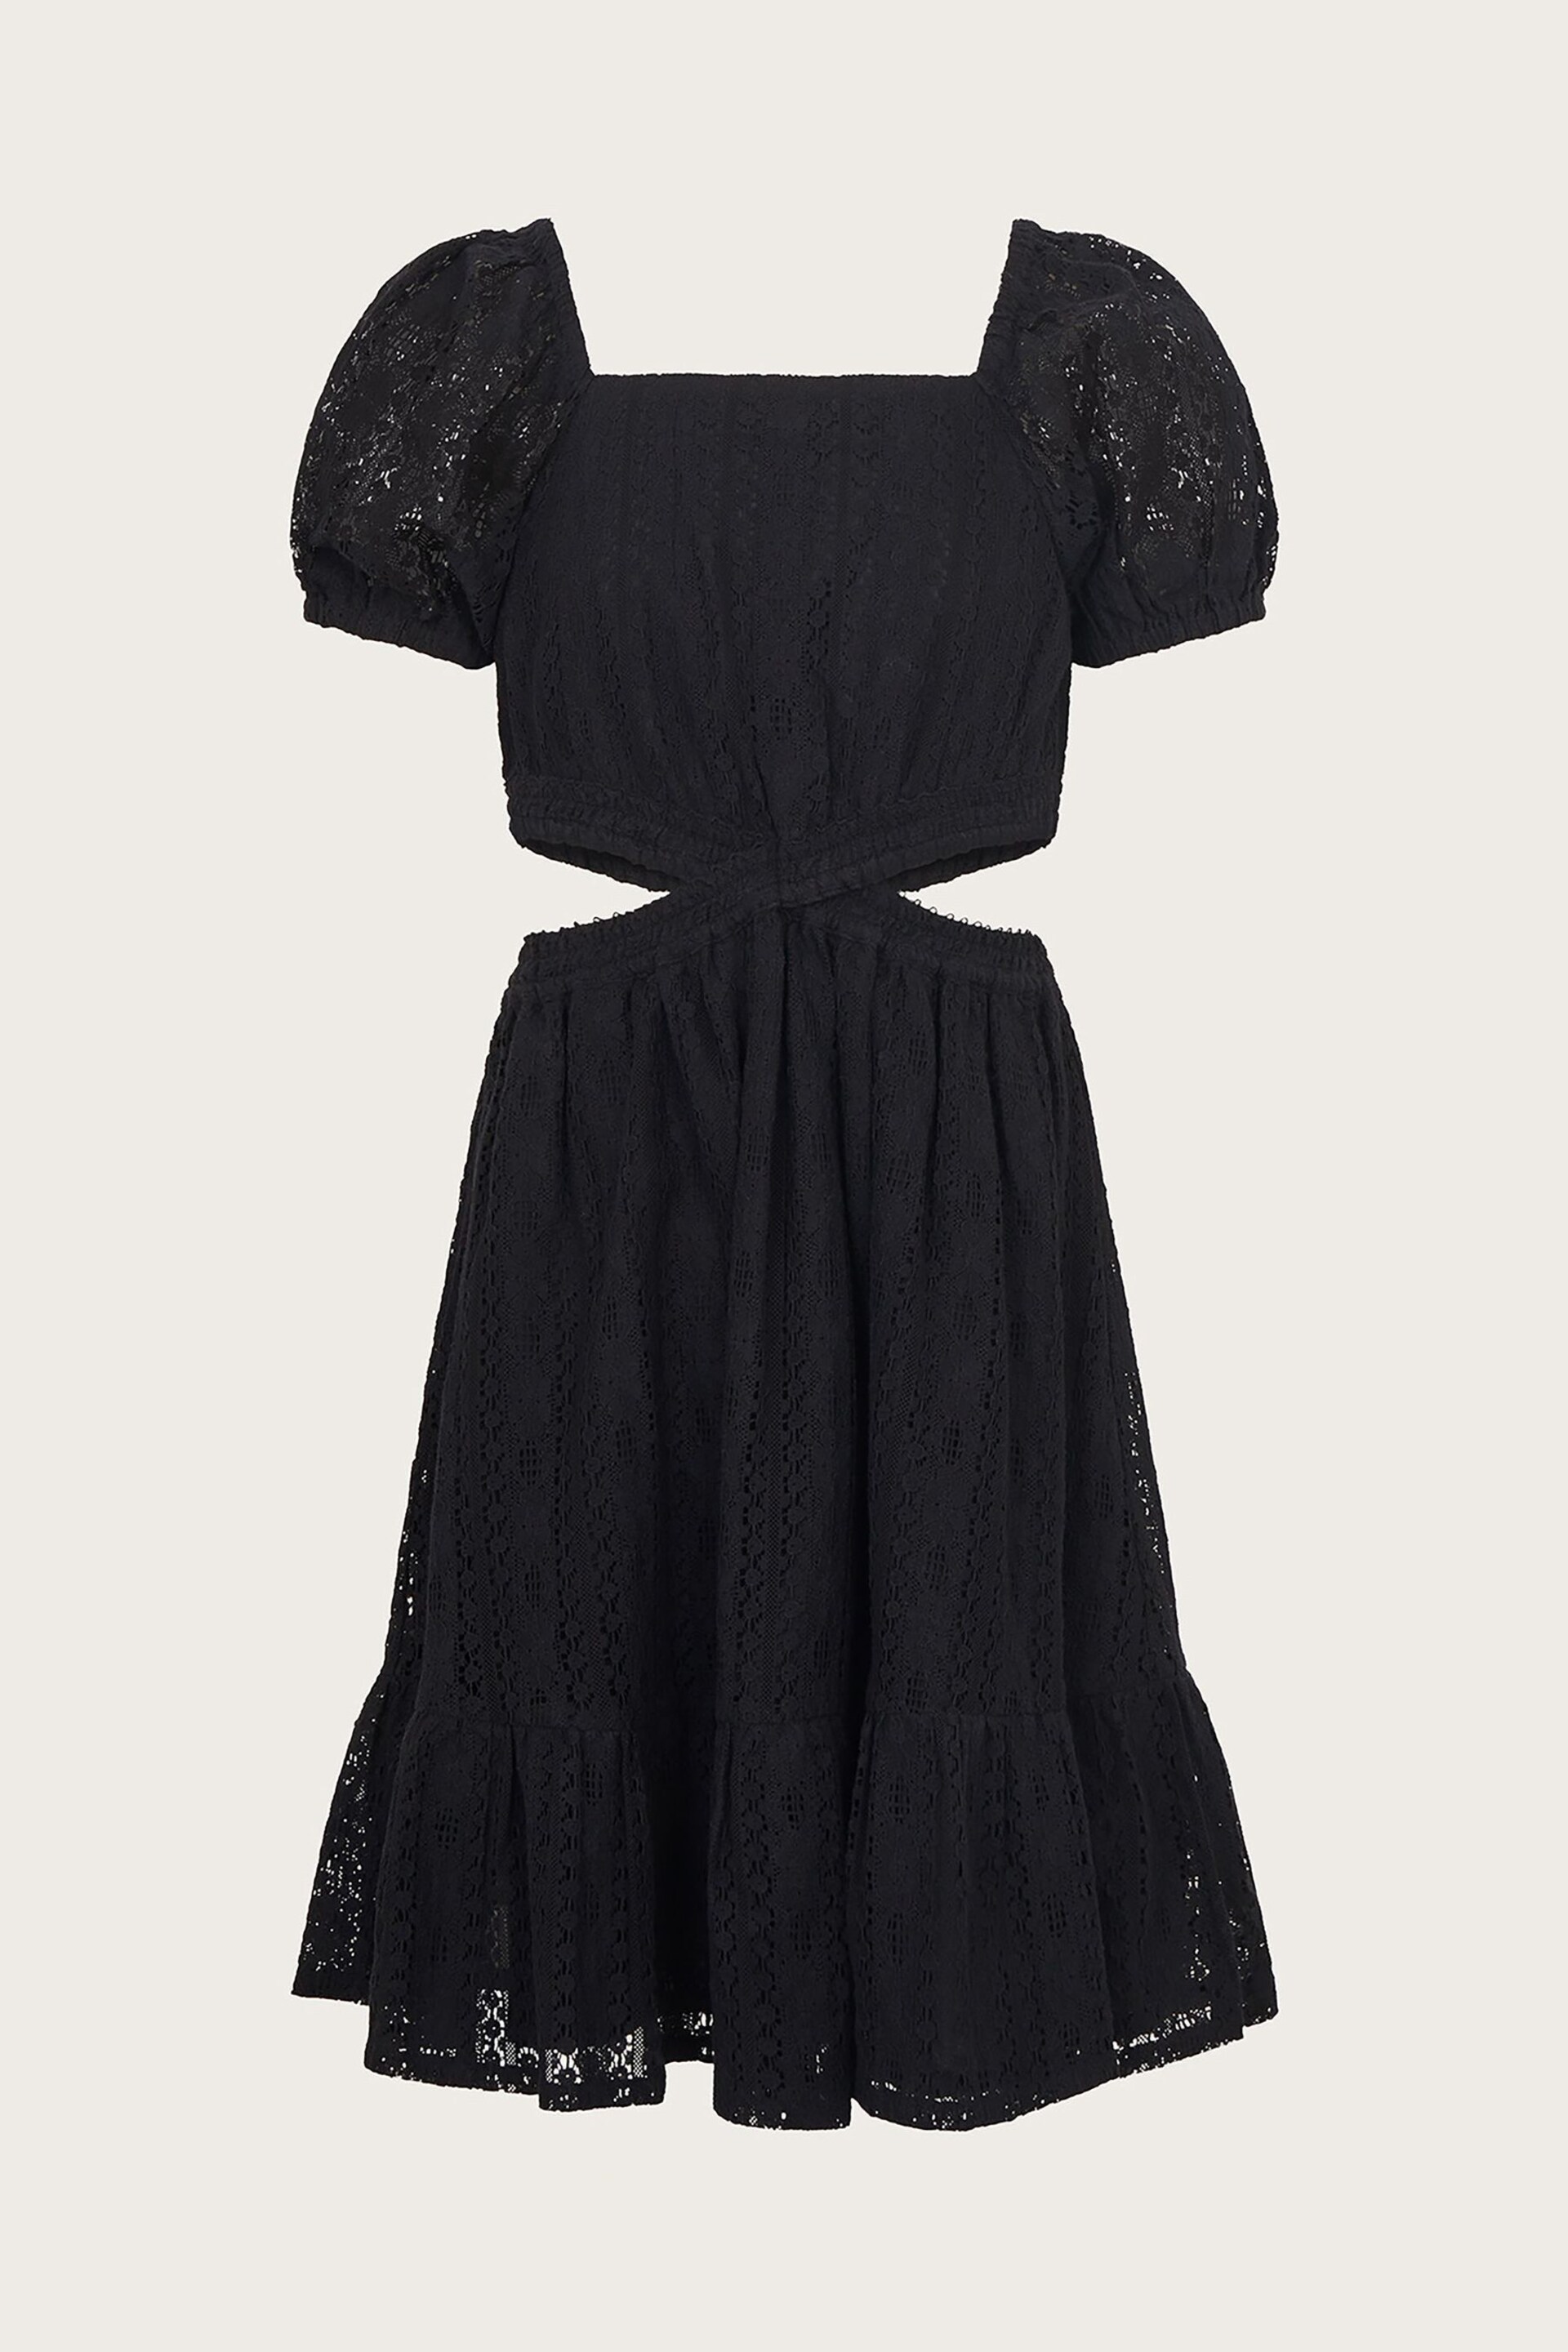 Monsoon Black Lace Cut Out Dress - Image 2 of 3